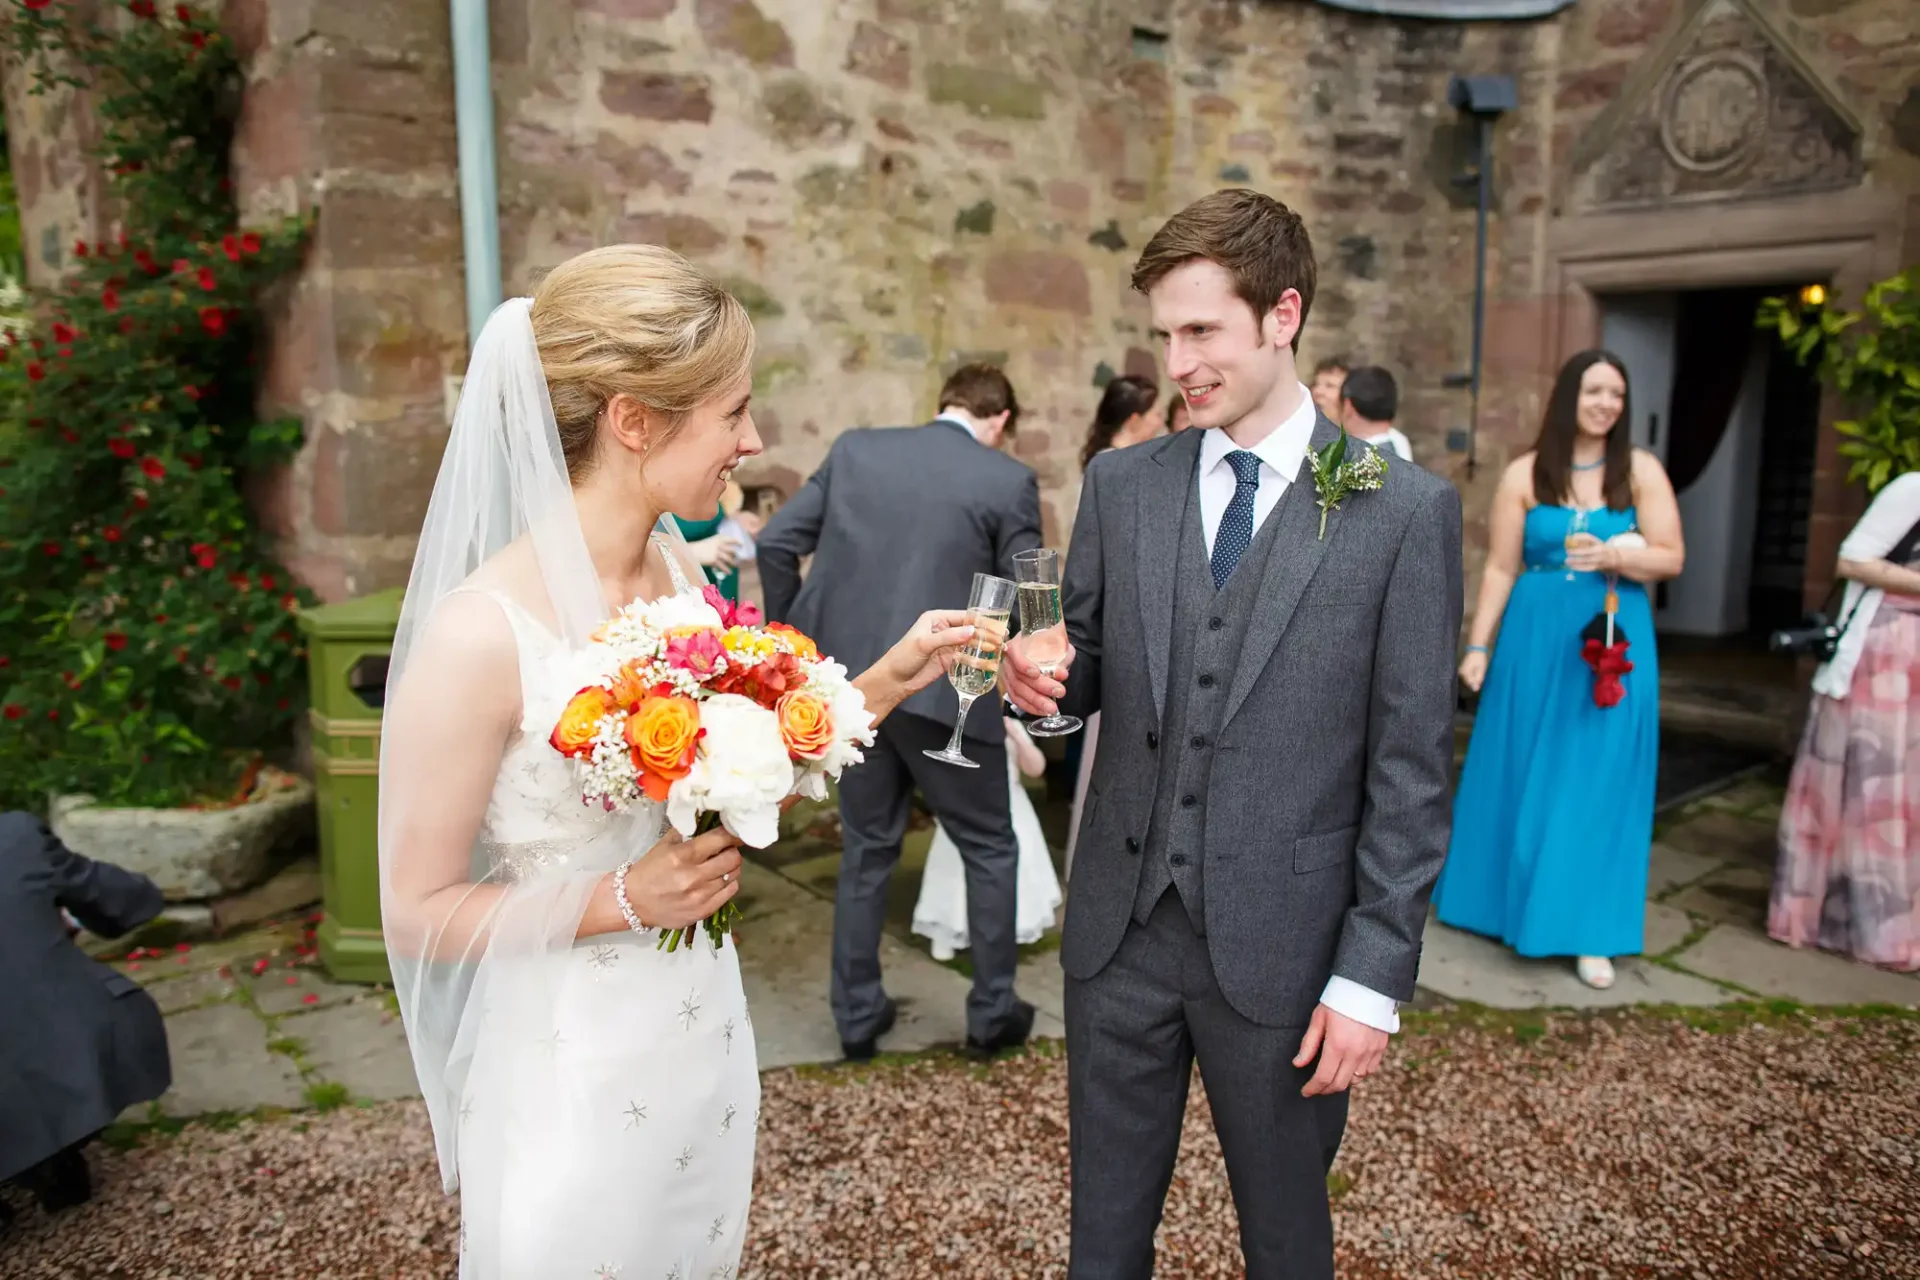 A bride and groom smiling at each other, holding glasses of wine, with guests in the background at a wedding.